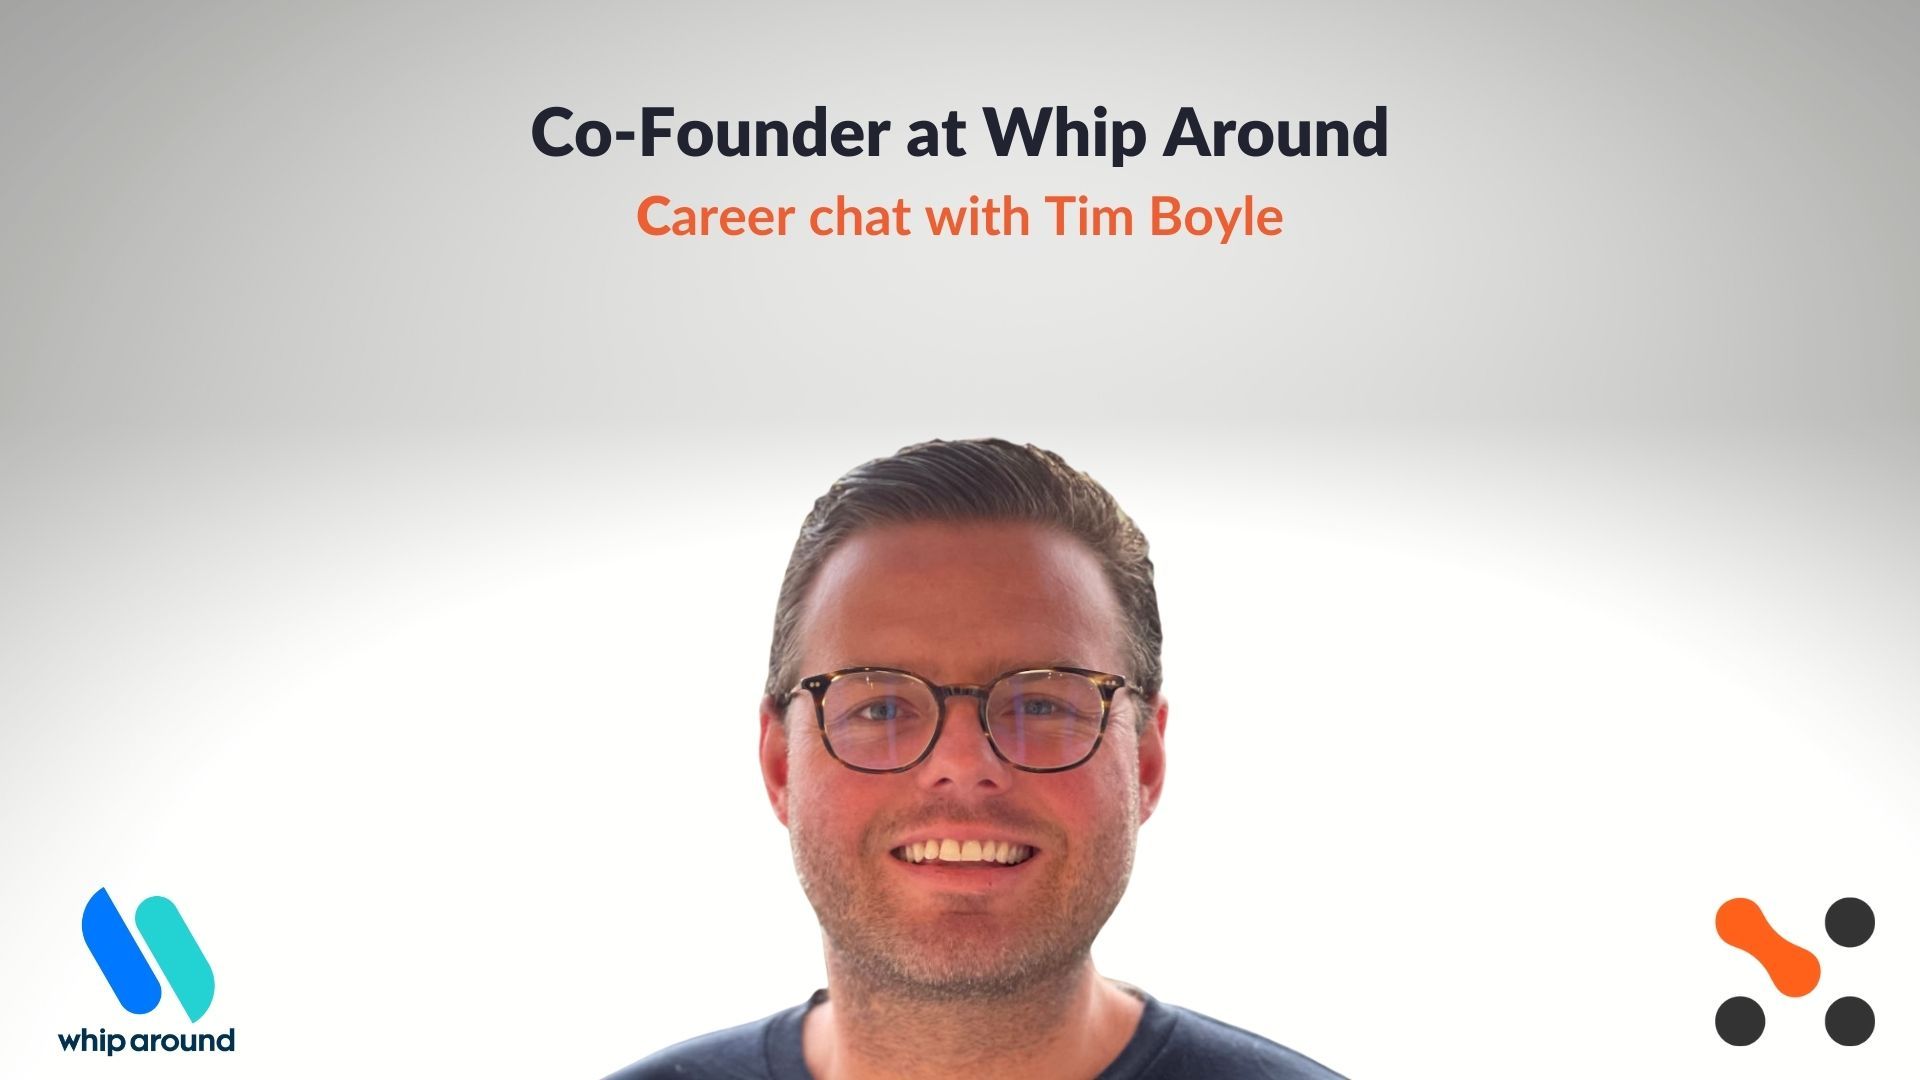 https://storage.googleapis.com/strapi-images-matchstiq/Career_chat_with_Tim_Boyle_Co_Founder_at_Whip_Around_9574db2937/Career_chat_with_Tim_Boyle_Co_Founder_at_Whip_Around_9574db2937.jpg